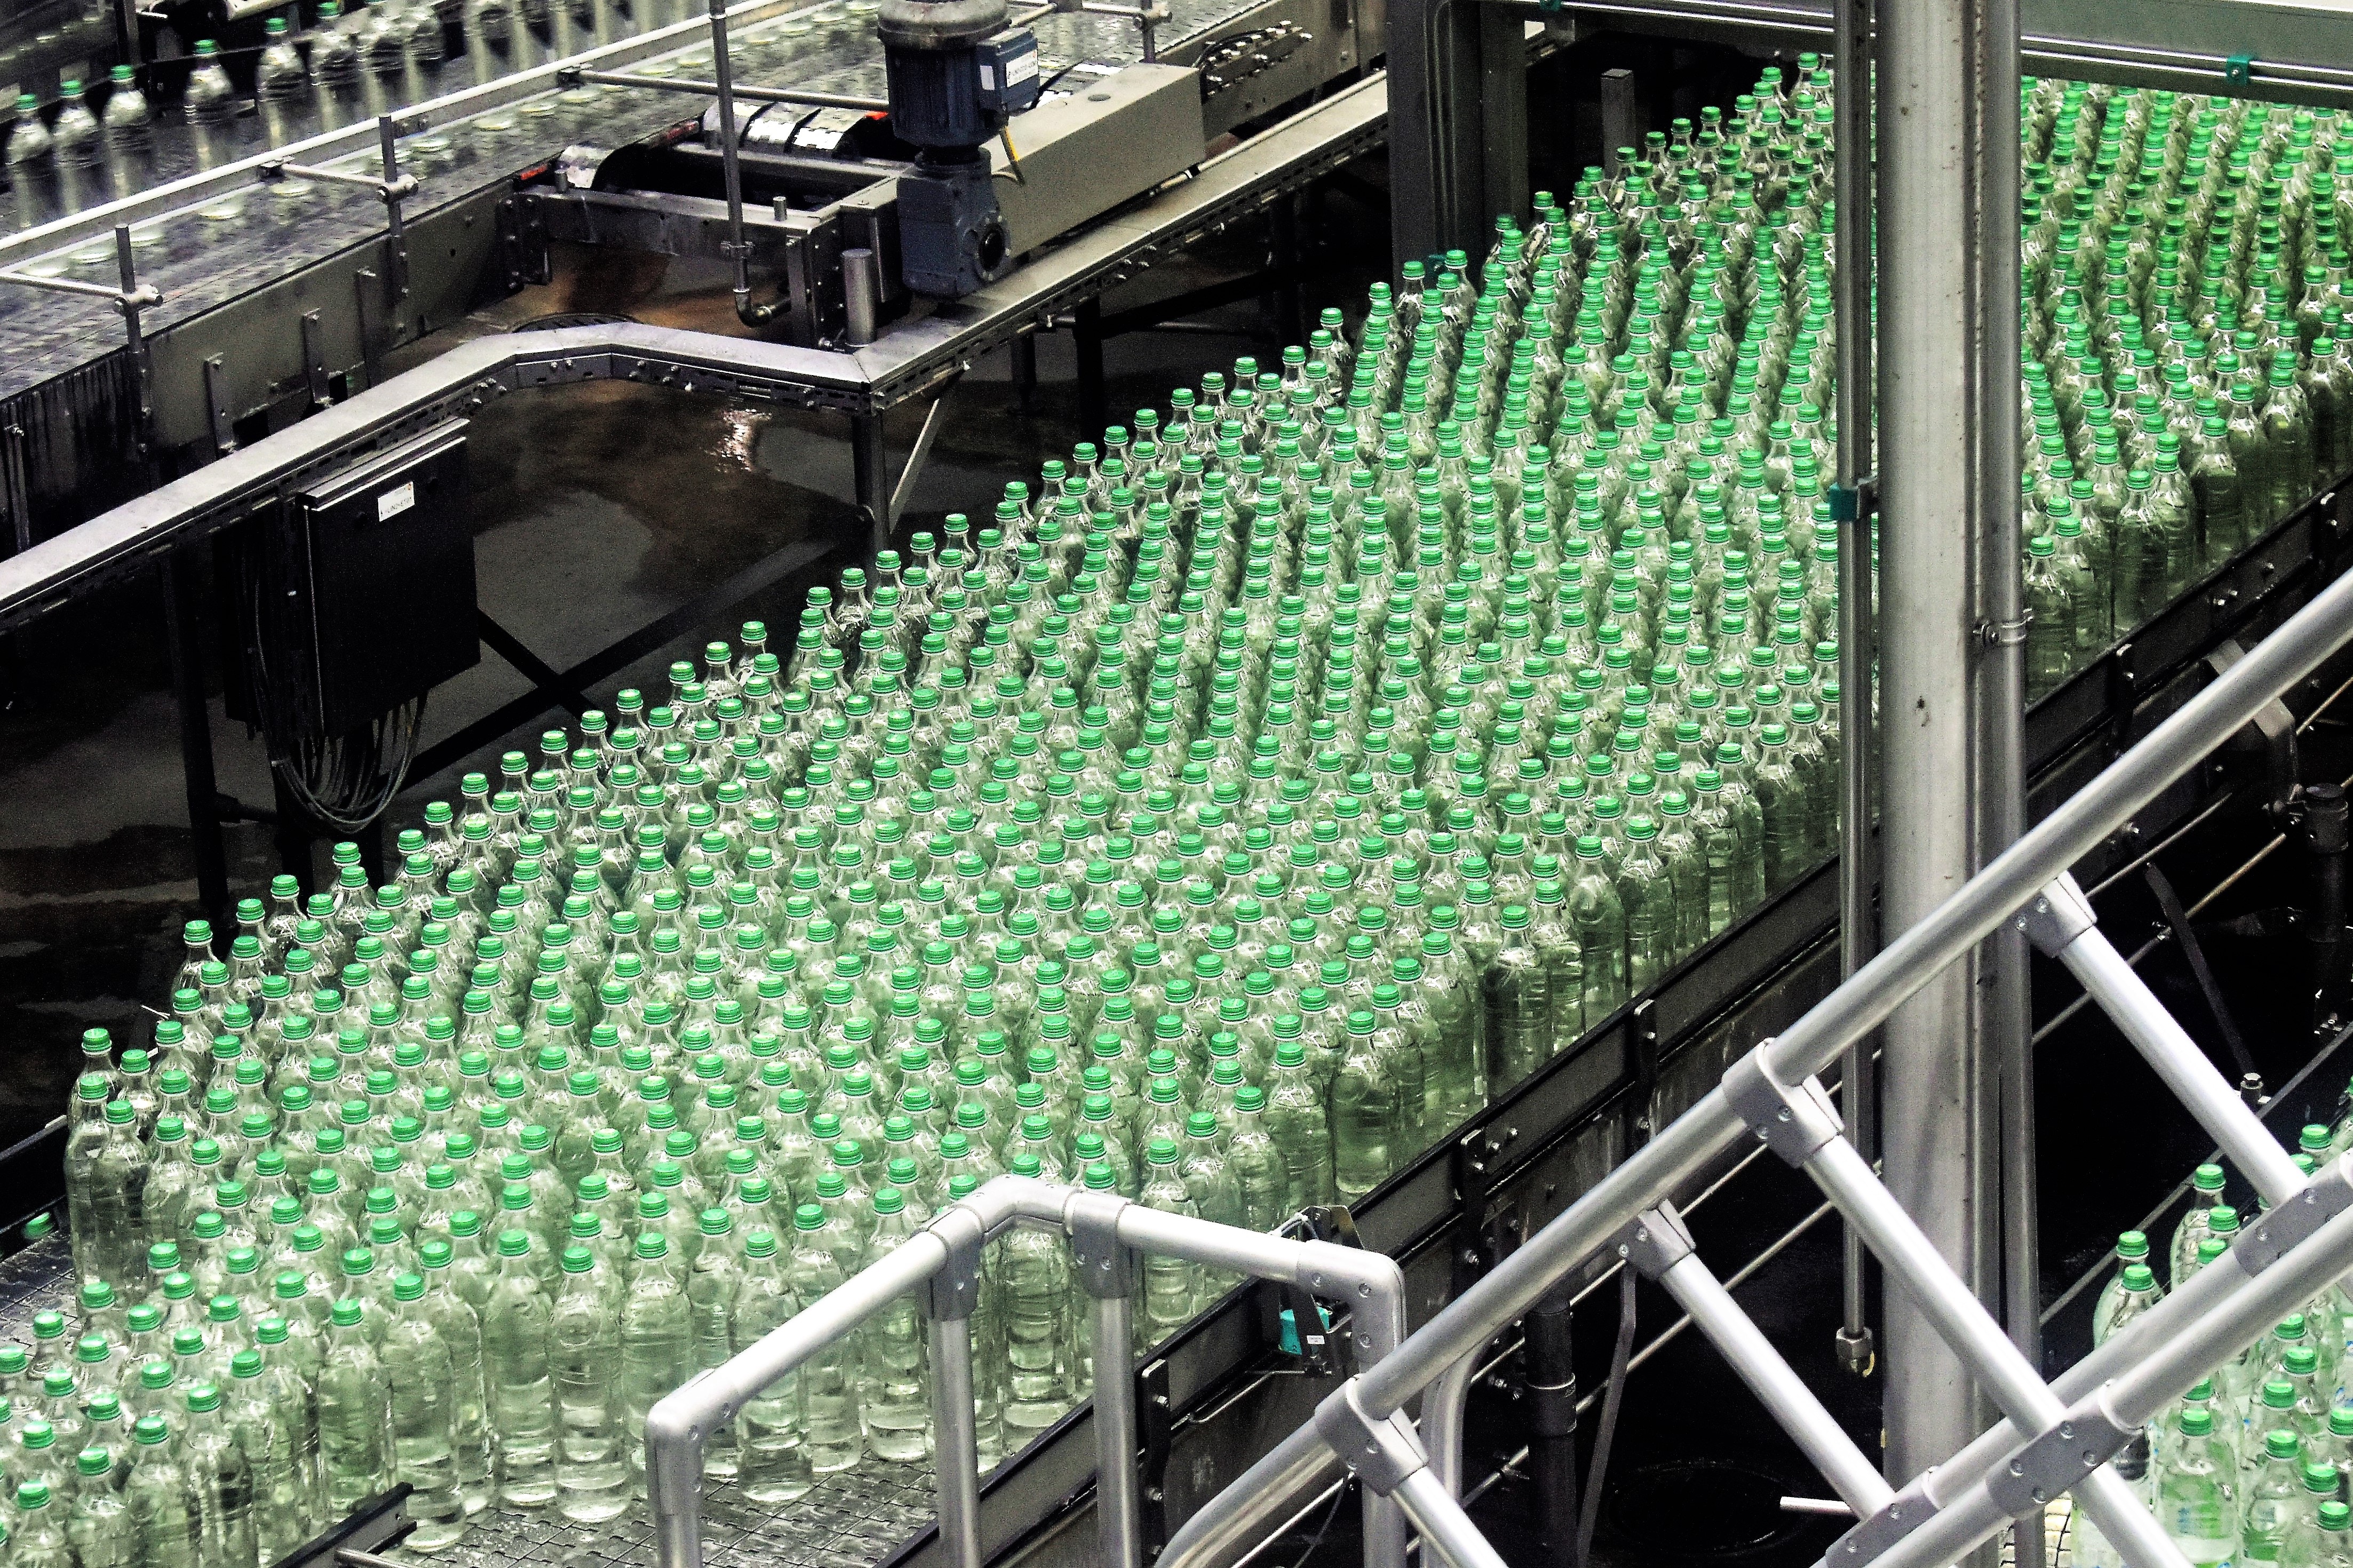 Green glass bottles on a manufacturing line.